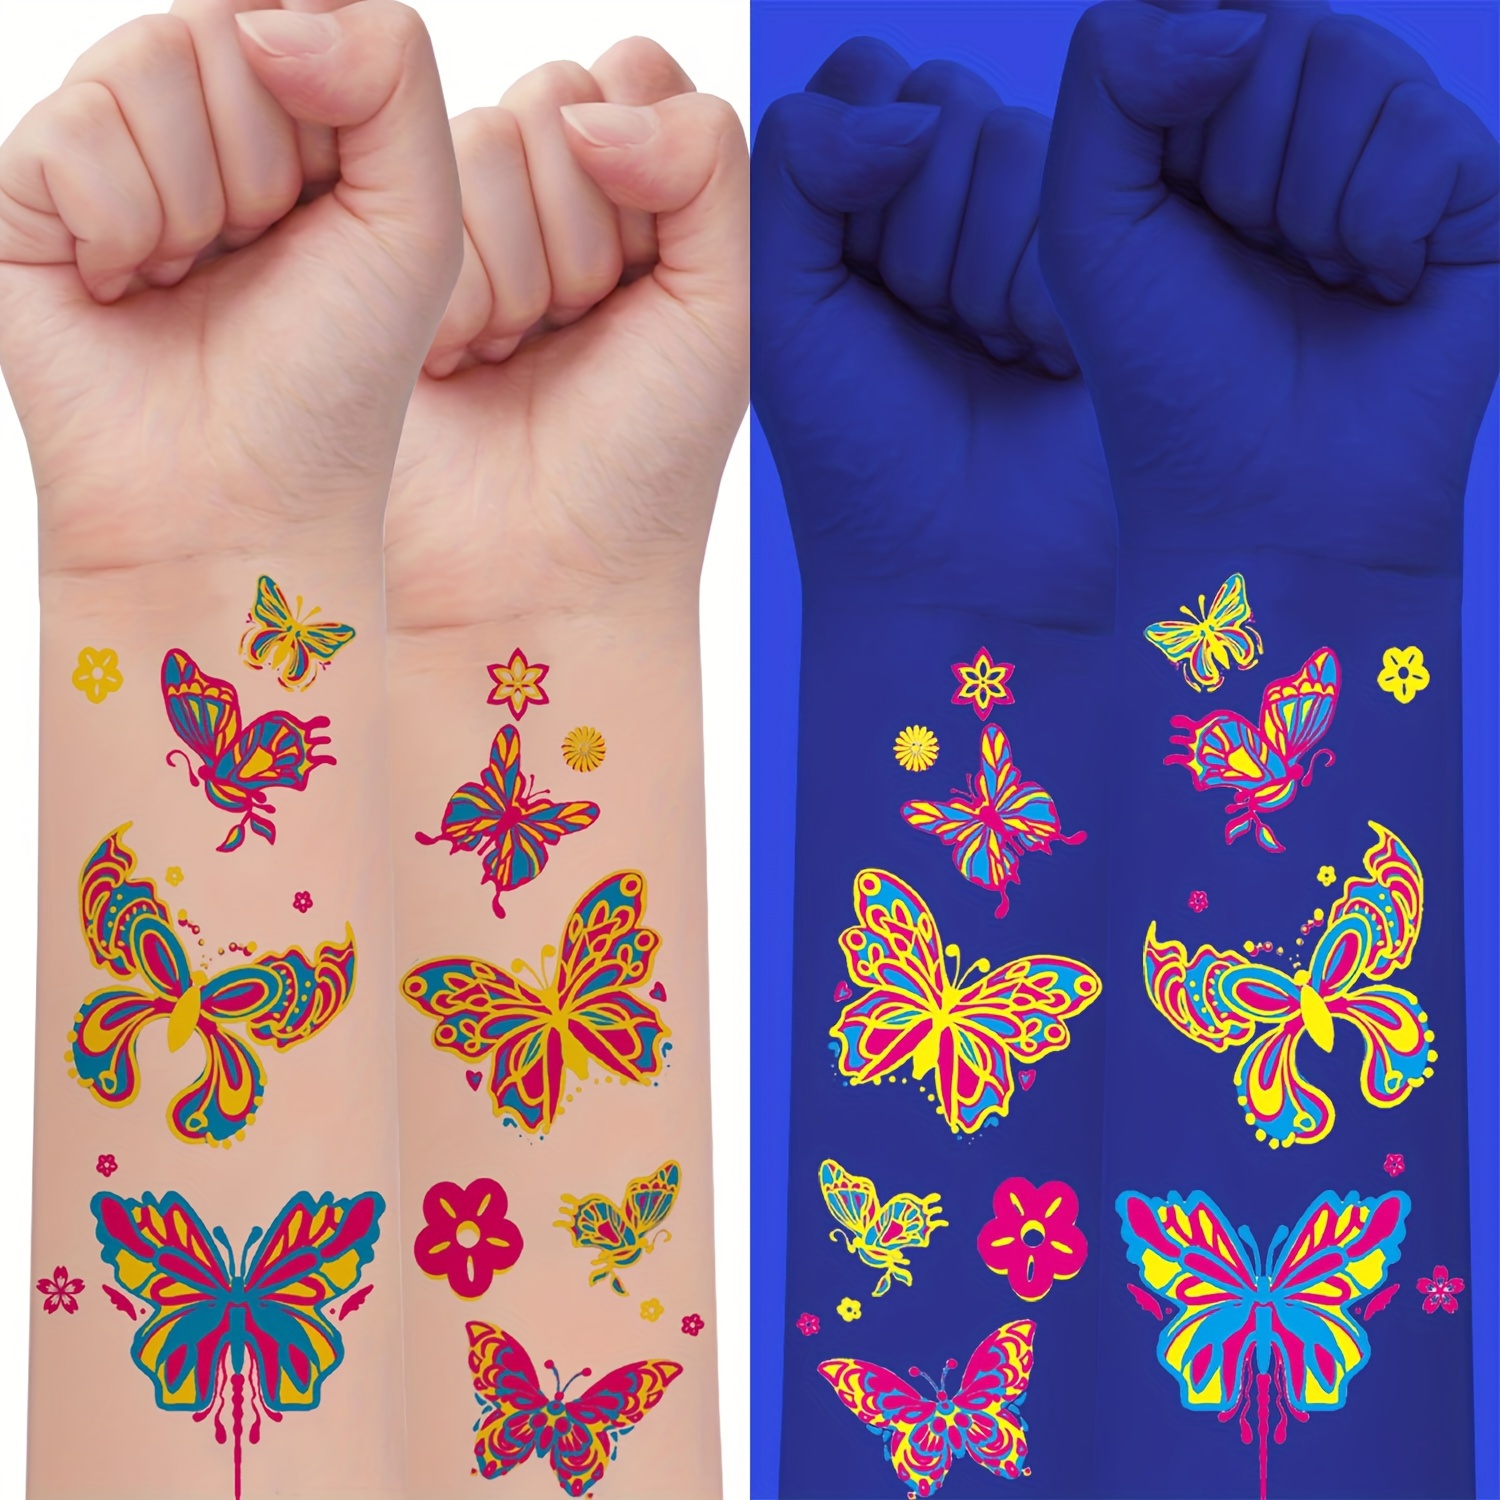 

10pcs (90 Patterns), Colorful Butterfly Fluorescent Temporary Tattoo Stickers, Glow In The Dark Fake Tattoo Stickers, Party Bar Party Body Art Makeup Tattoos For Women For Music Festival